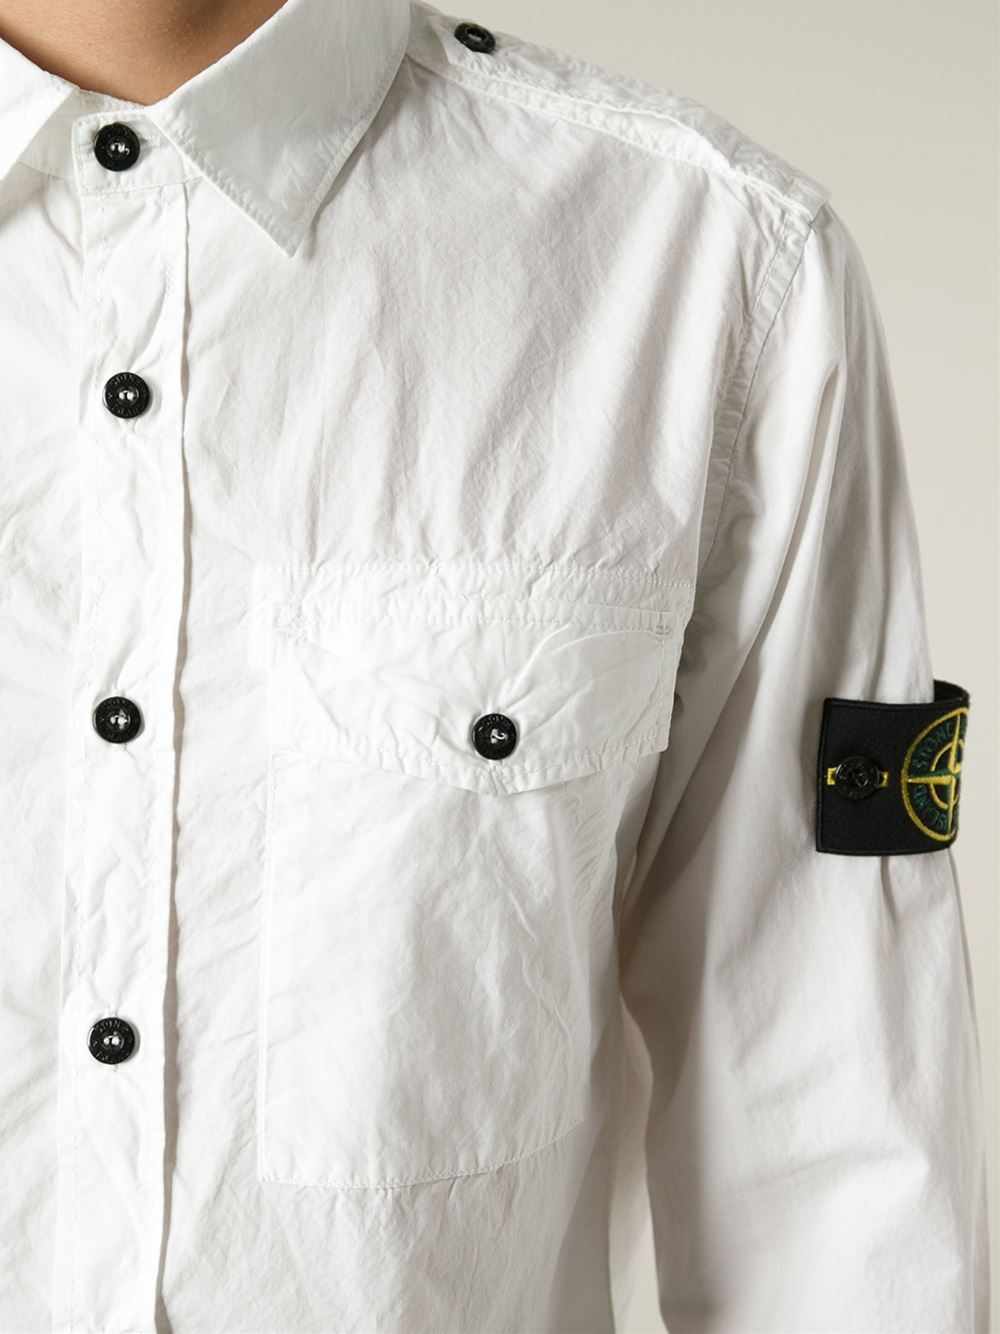 Stone Island Sleeve Patch Shirt in White for Men - Lyst